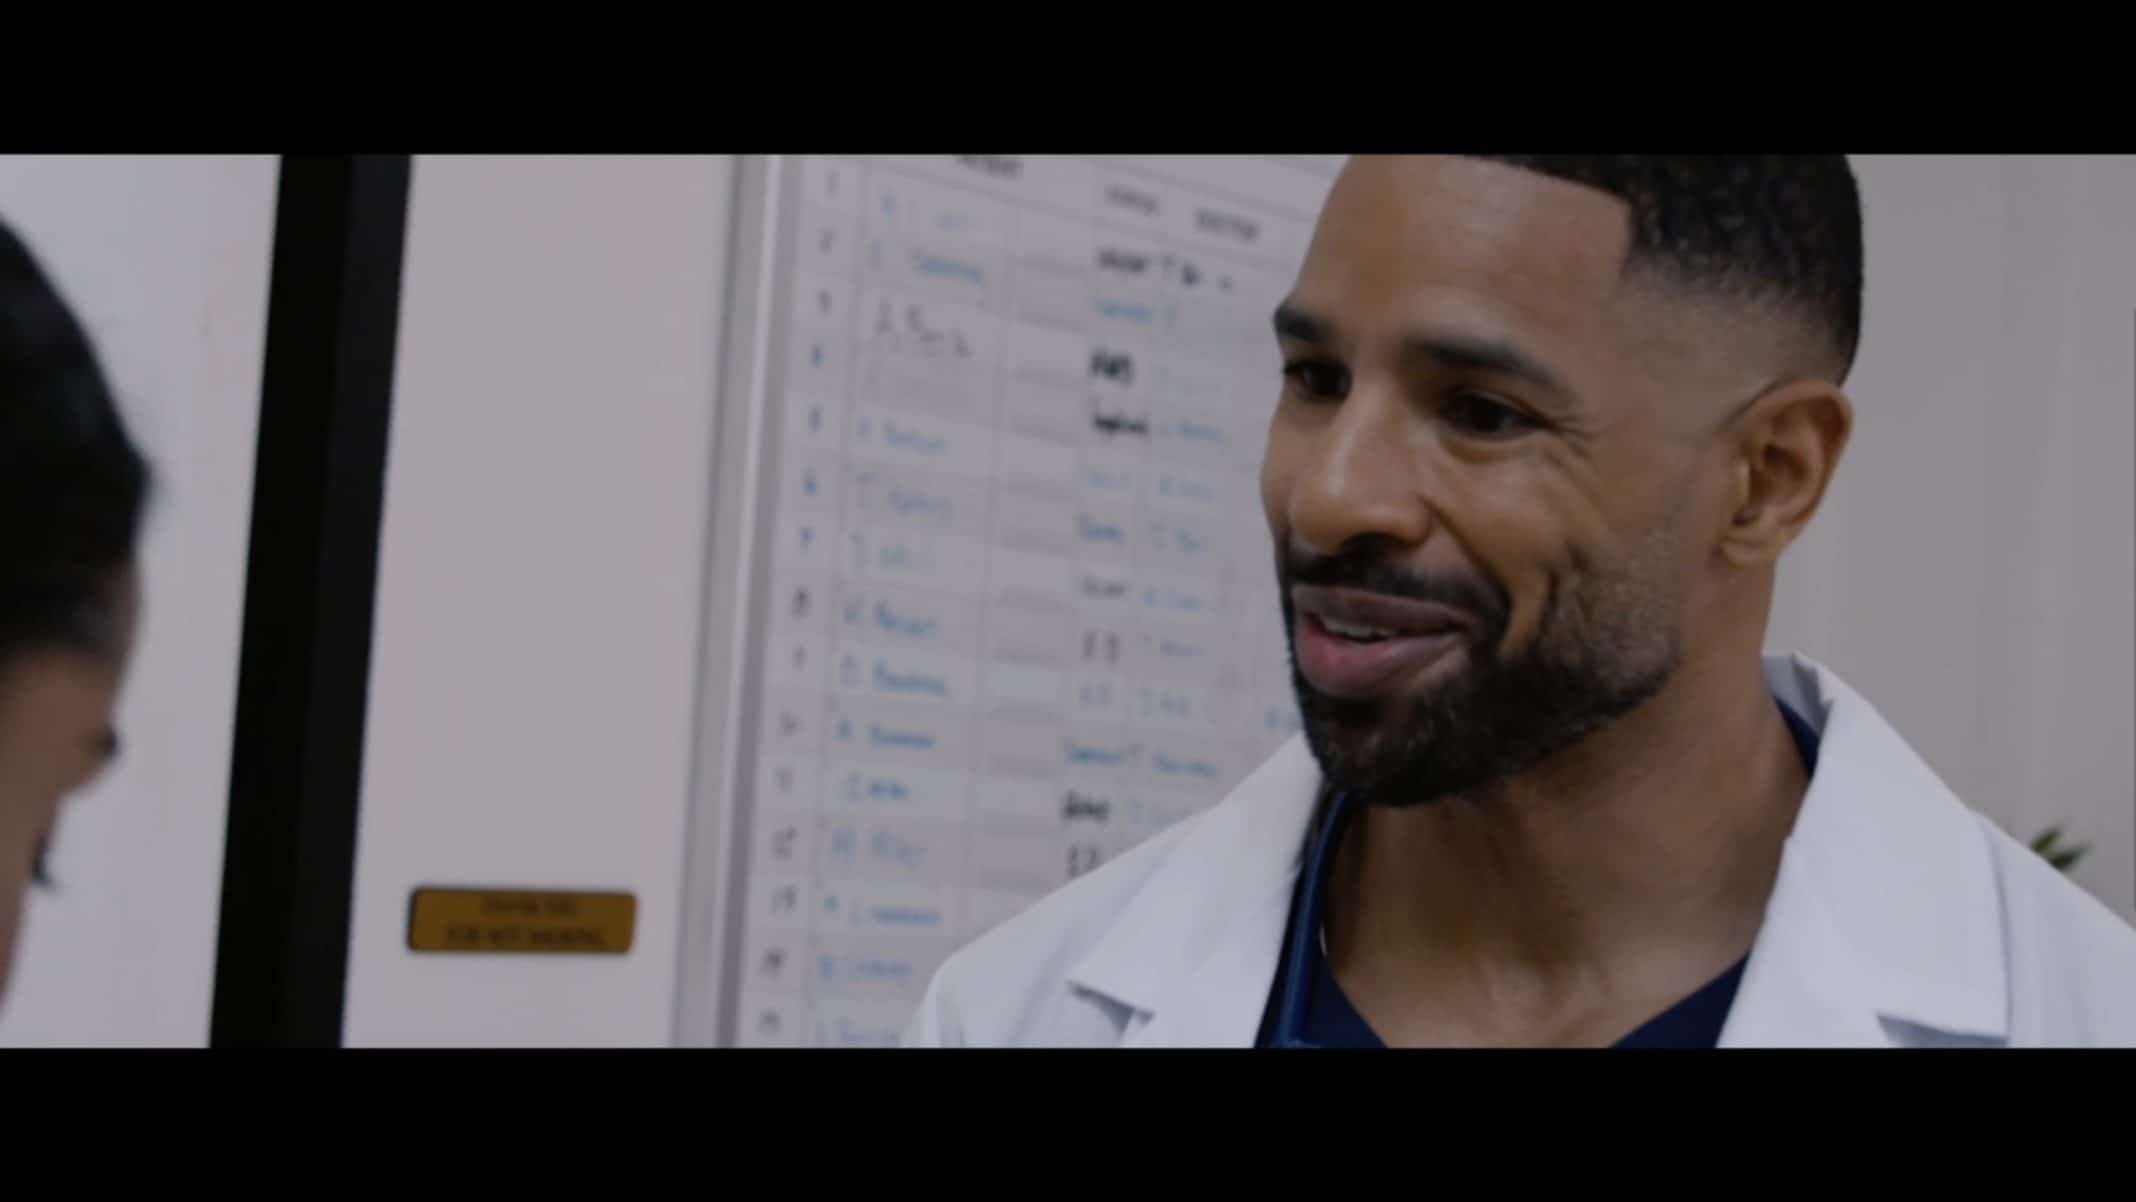 Dr. Cintron (Tremayne Norris) reconnecting with Erica.